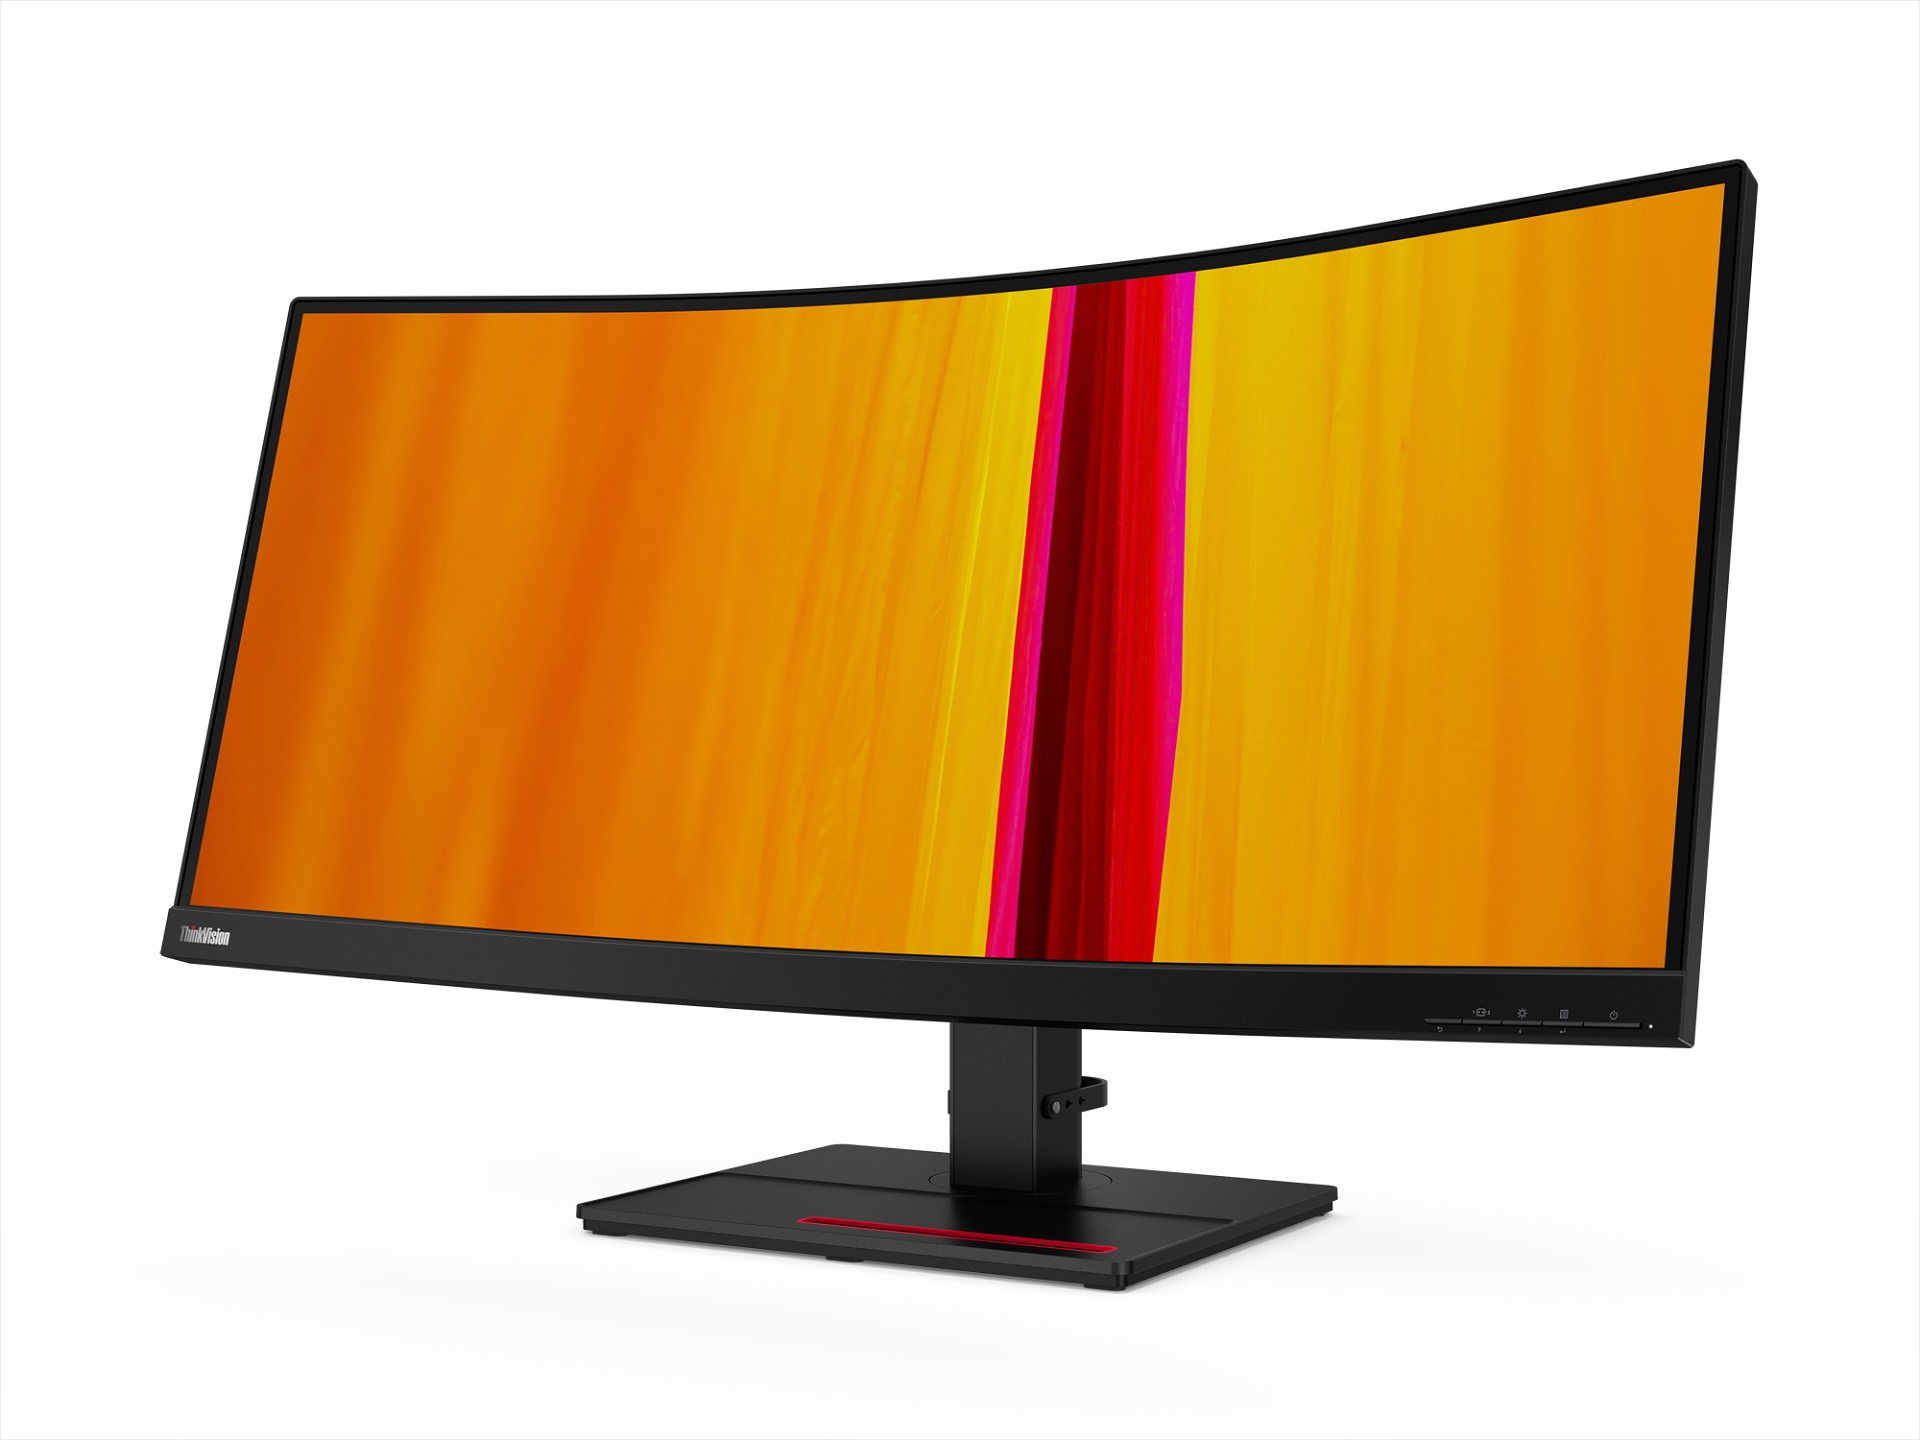 Lenovo ThinkVision ultrawide curved monitor is 40% off today | Digital Trends thumbnail